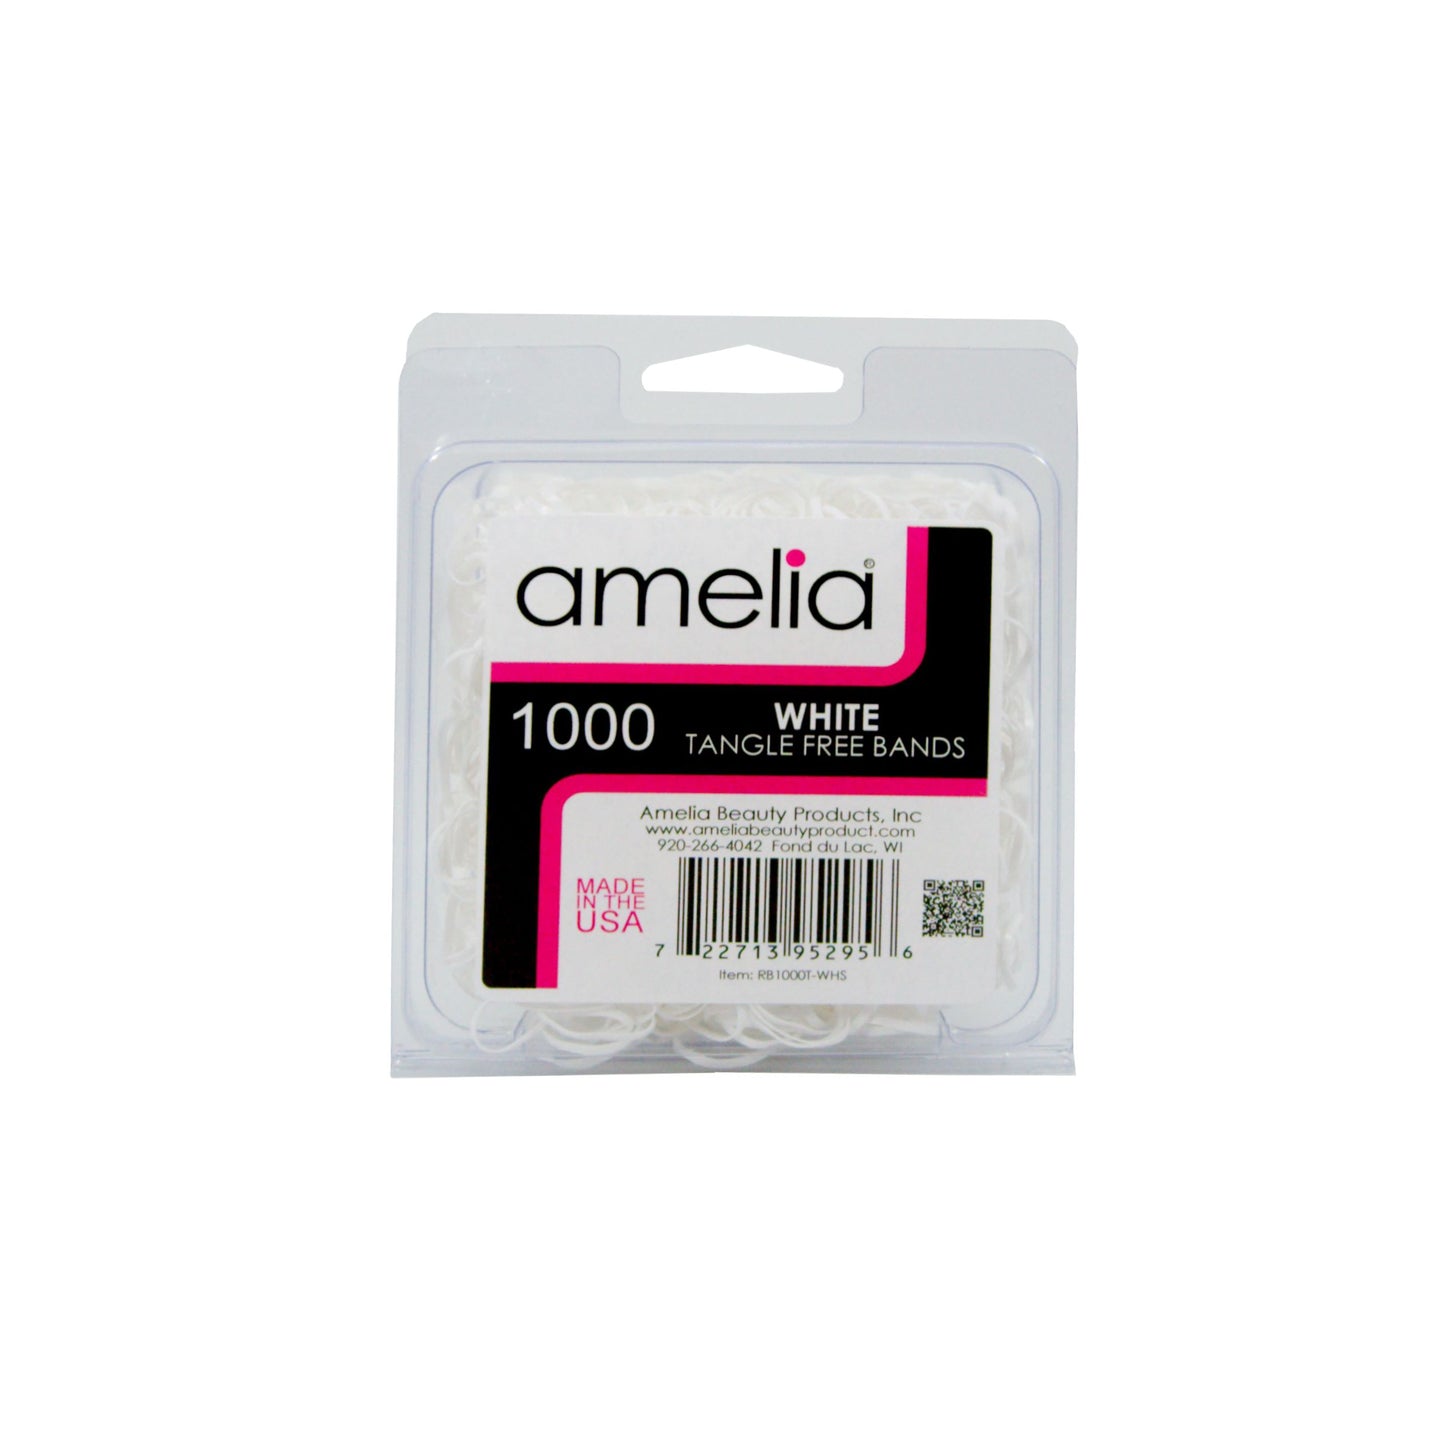 Amelia Beauty | 1/2in, White, Tangle Free Elastic Pony Tail Holders | Made in USA, Ideal for Ponytails, Braids, Twists. For Women, Girls. Pain Free, Snag Free, Easy Off | 1000 Pack